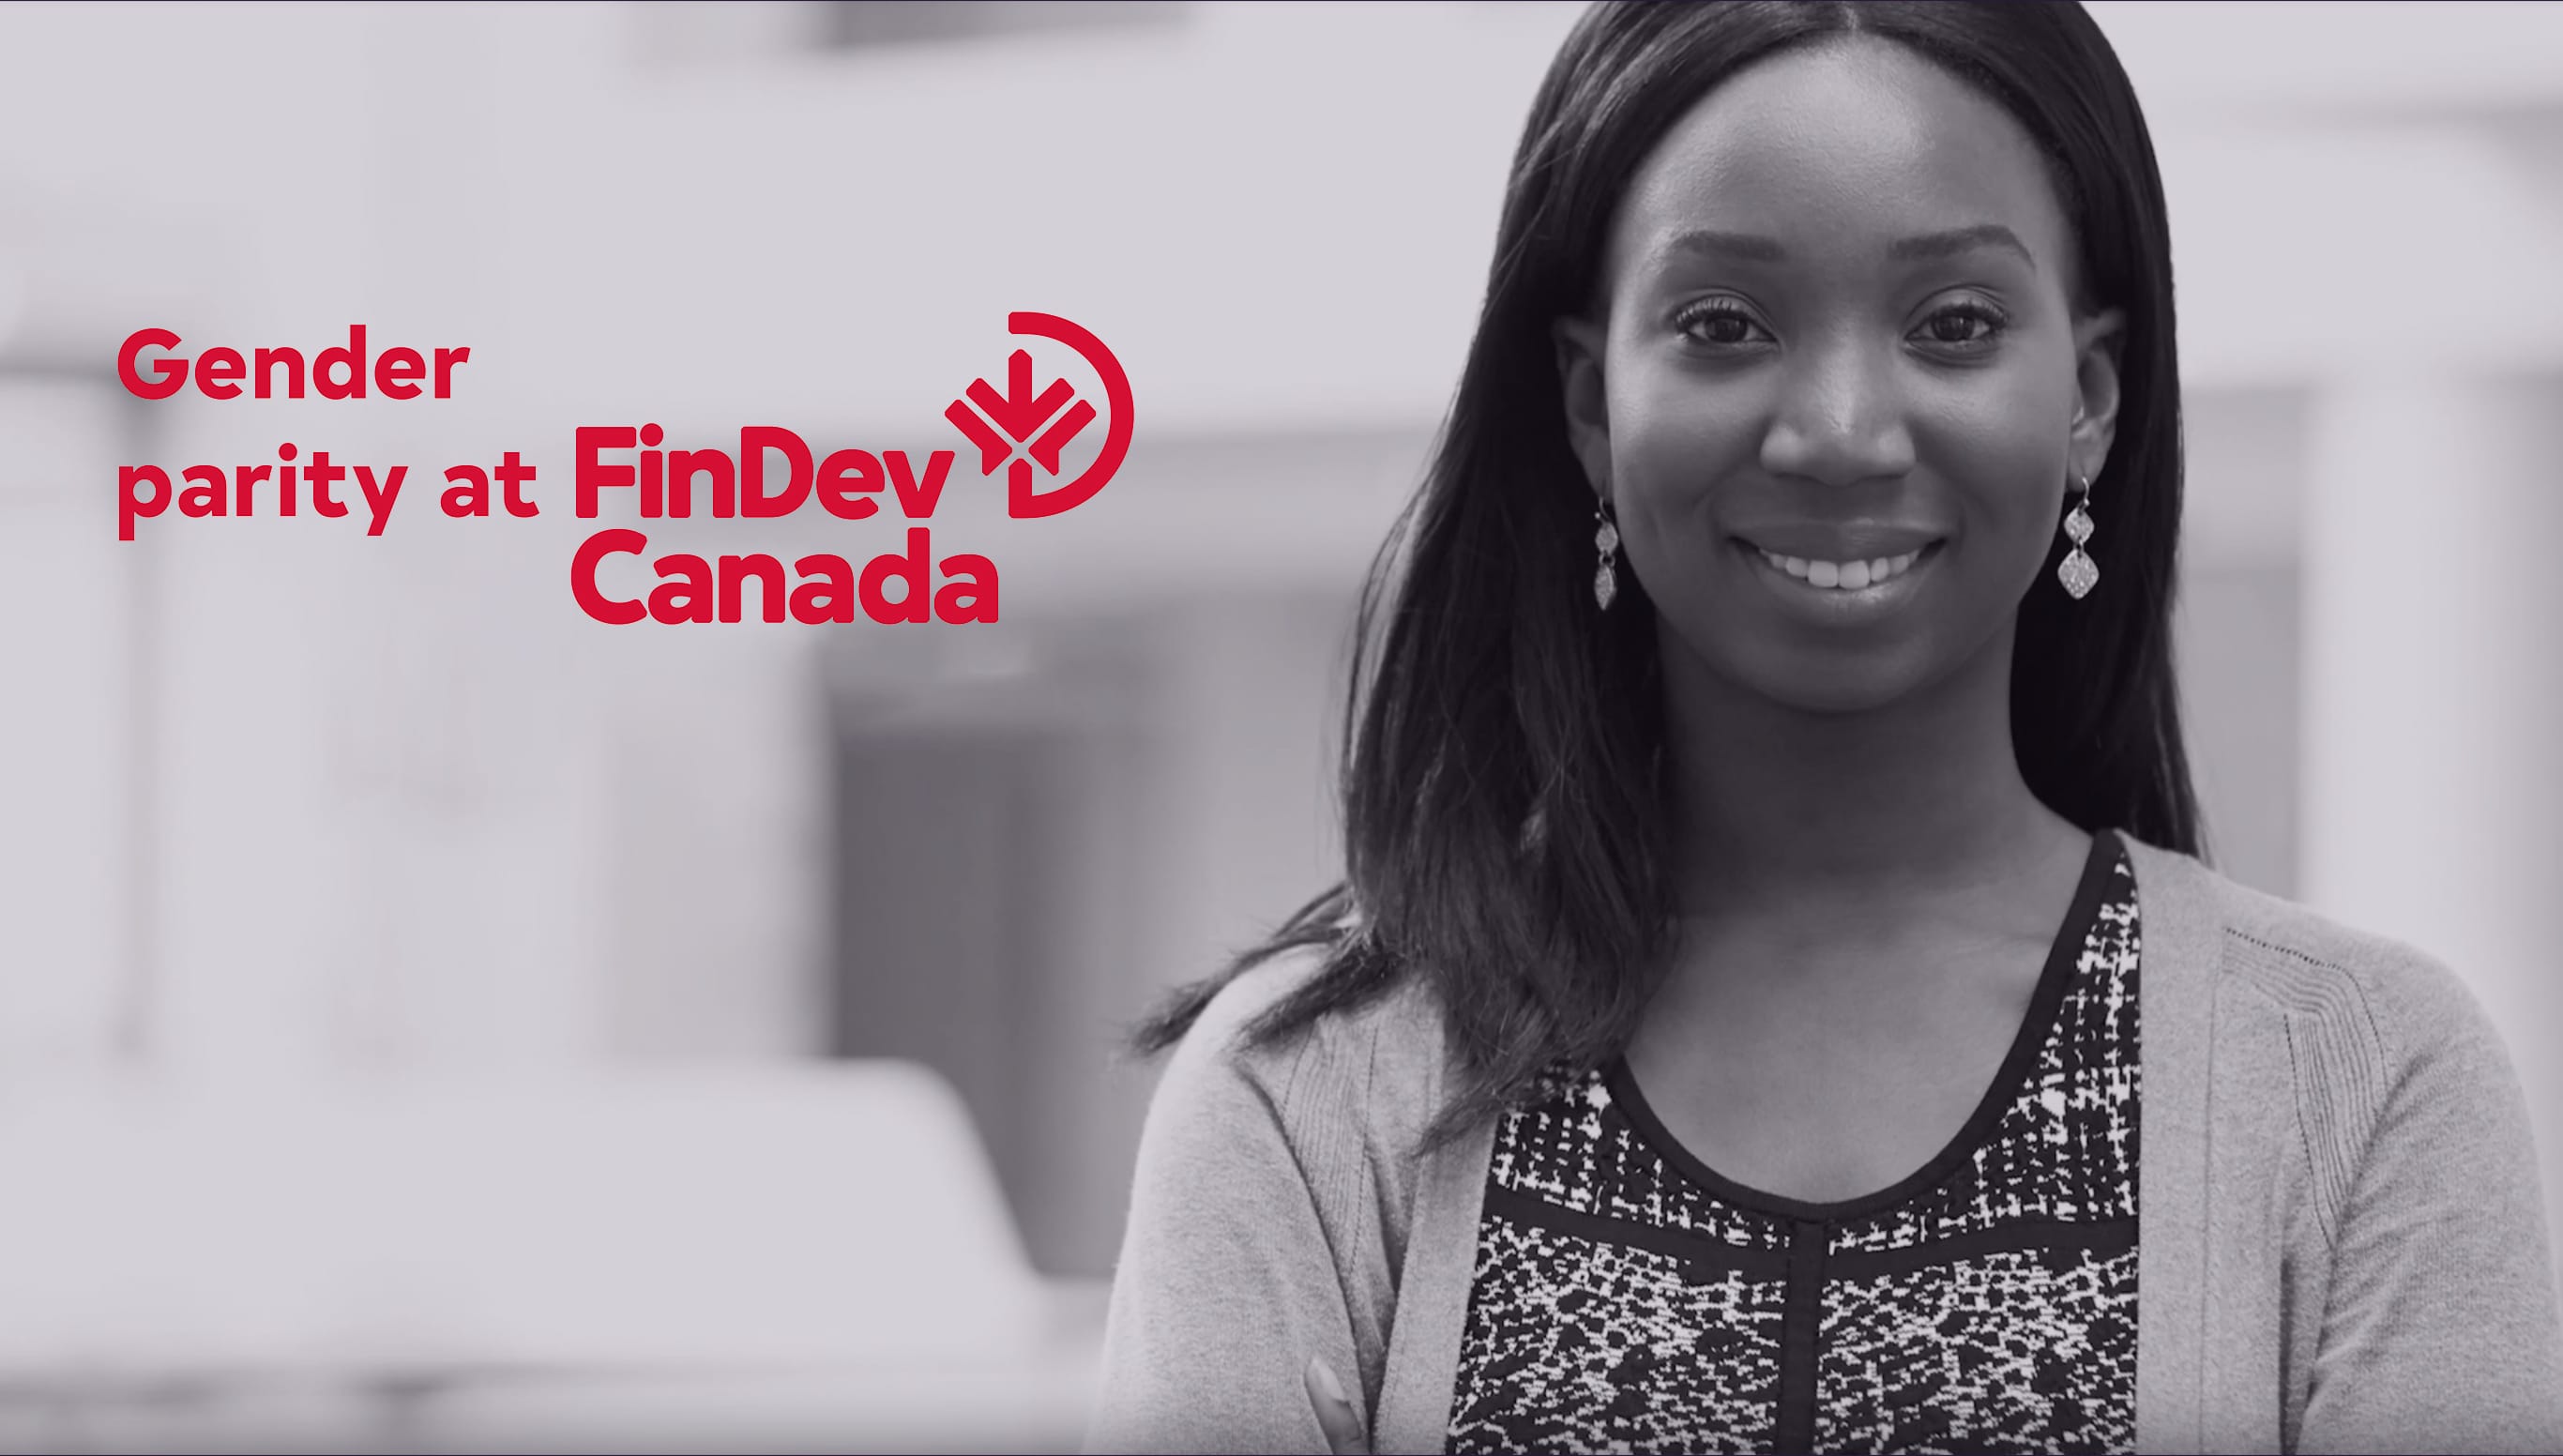 Young FinDev employee smiles in the workplace